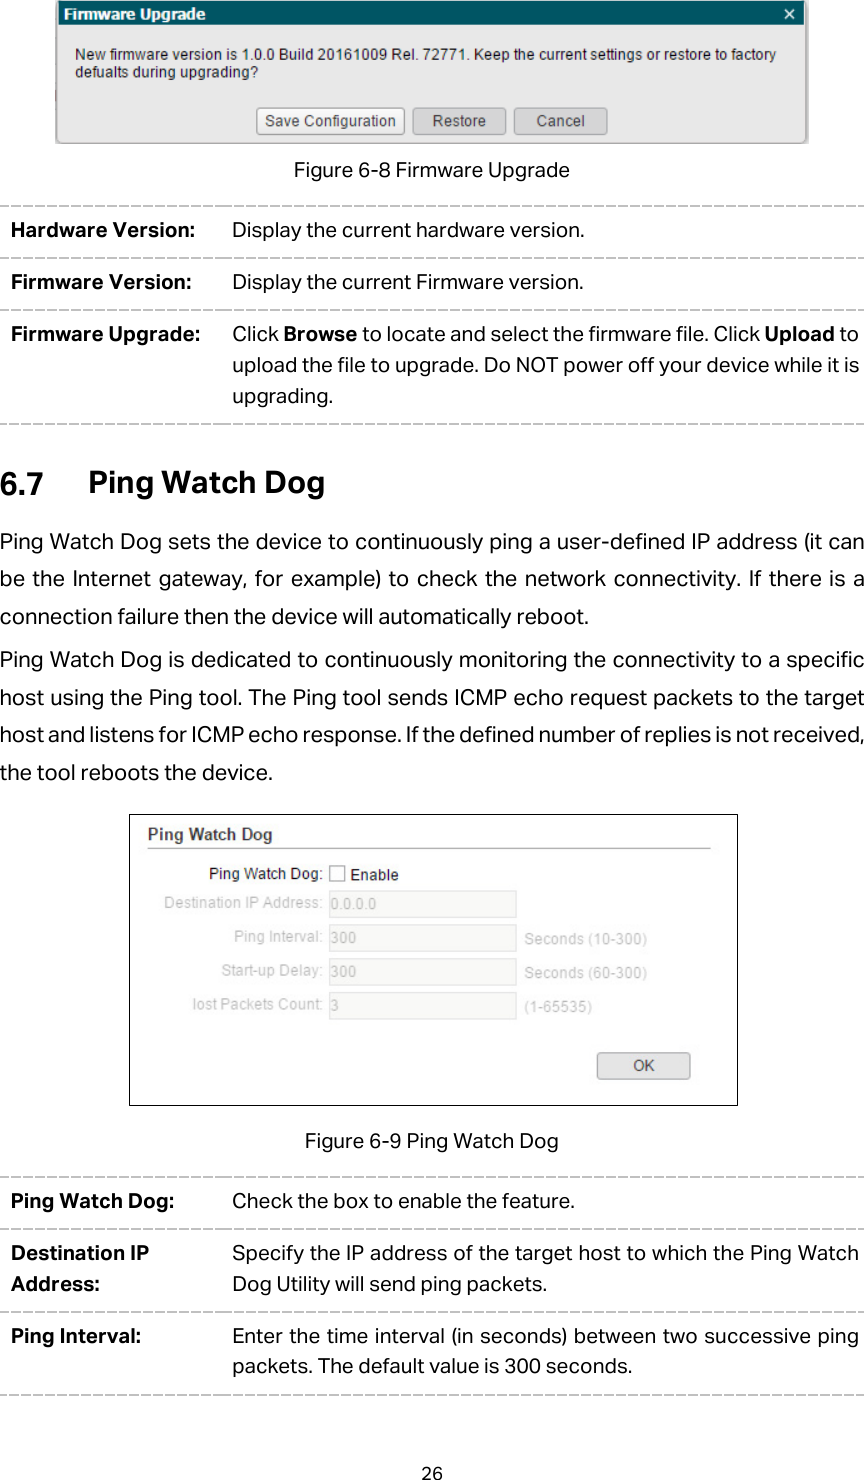  Figure 6-8 Firmware Upgrade Hardware Version: Display the current hardware version. Firmware Version:  Display the current Firmware version. Firmware Upgrade:  Click Browse to locate and select the firmware file. Click Upload to upload the file to upgrade. Do NOT power off your device while it is upgrading.  Ping Watch Dog Ping Watch Dog sets the device to continuously ping a user-defined IP address (it can be the Internet gateway, for example) to check the network connectivity. If there is a connection failure then the device will automatically reboot.   Ping Watch Dog is dedicated to continuously monitoring the connectivity to a specific host using the Ping tool. The Ping tool sends ICMP echo request packets to the target host and listens for ICMP echo response. If the defined number of replies is not received, the tool reboots the device.  Figure 6-9 Ping Watch Dog Ping Watch Dog: Check the box to enable the feature. Destination IP Address: Specify the IP address of the target host to which the Ping Watch Dog Utility will send ping packets.   Ping Interval:  Enter the time interval (in seconds) between two successive ping packets. The default value is 300 seconds. 26 